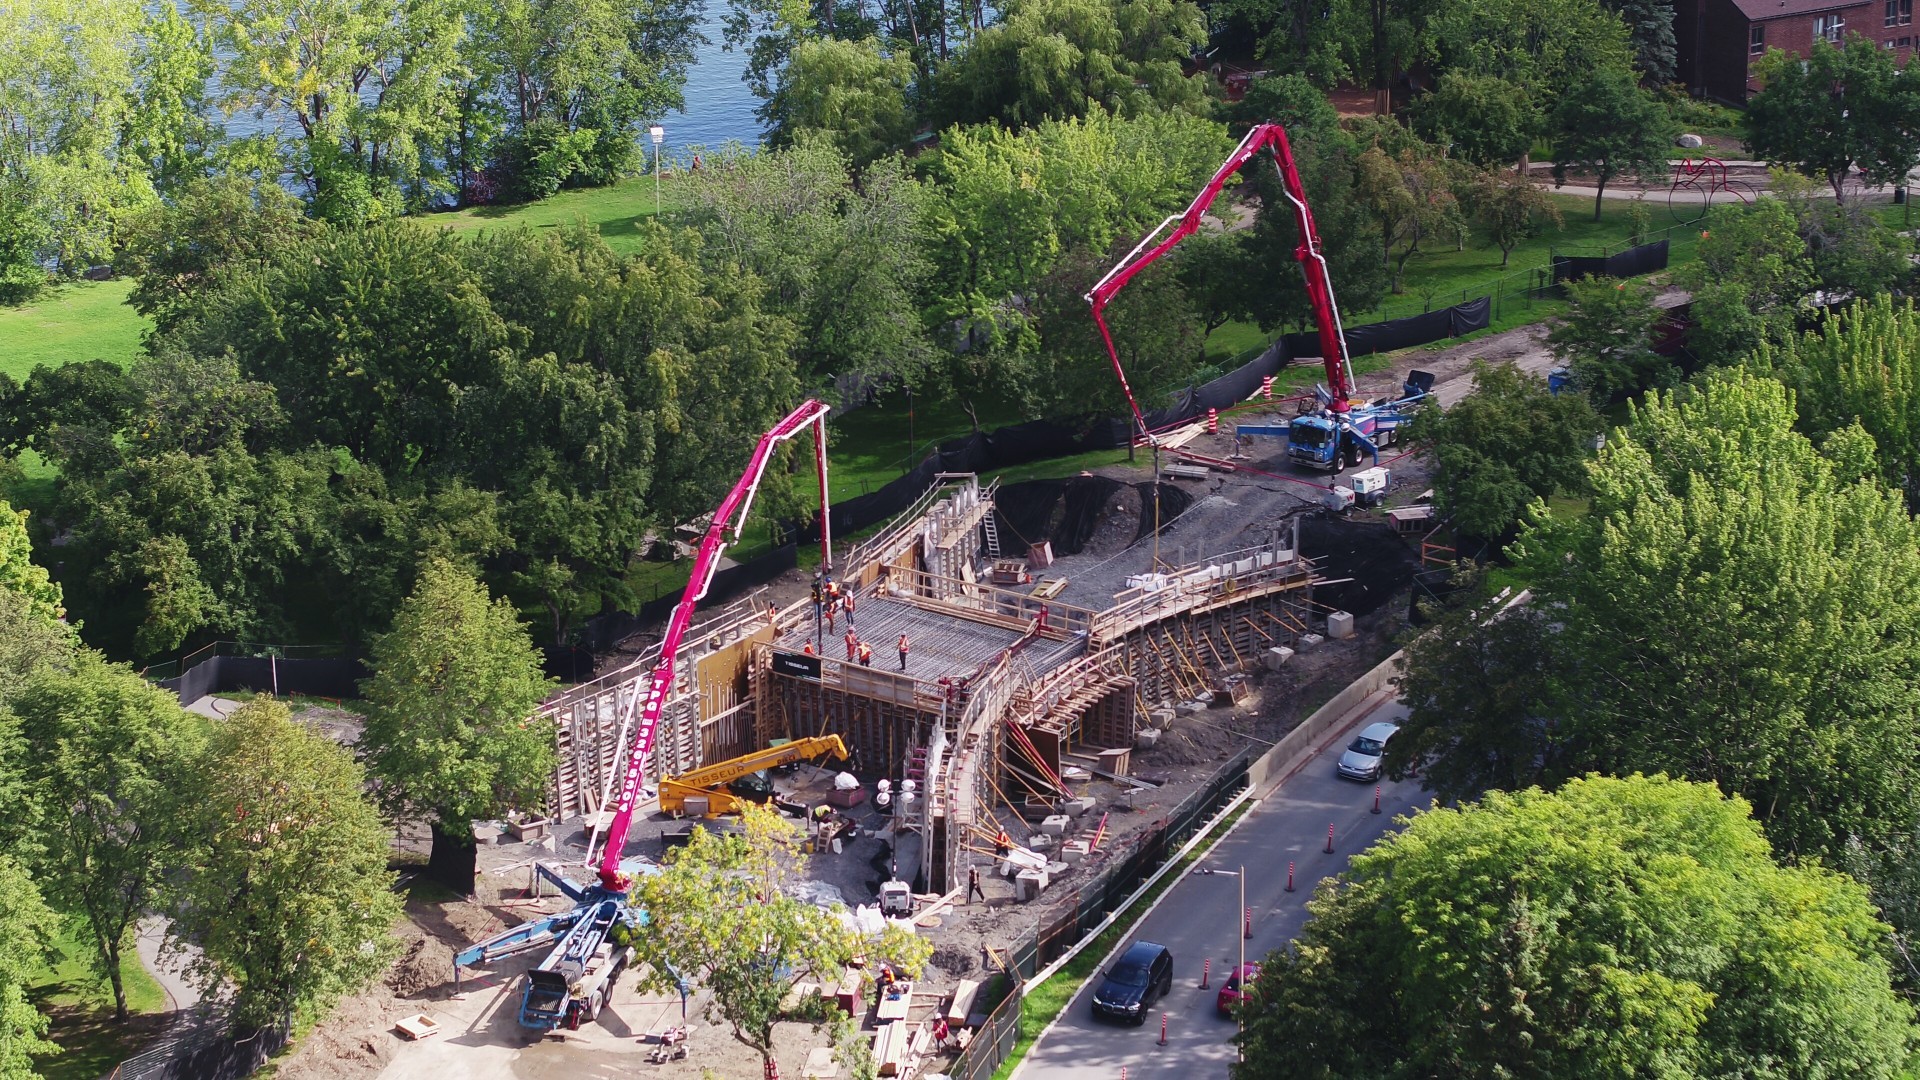 Ariel view of the bridge being constructed. Two red cranes dominate the action.